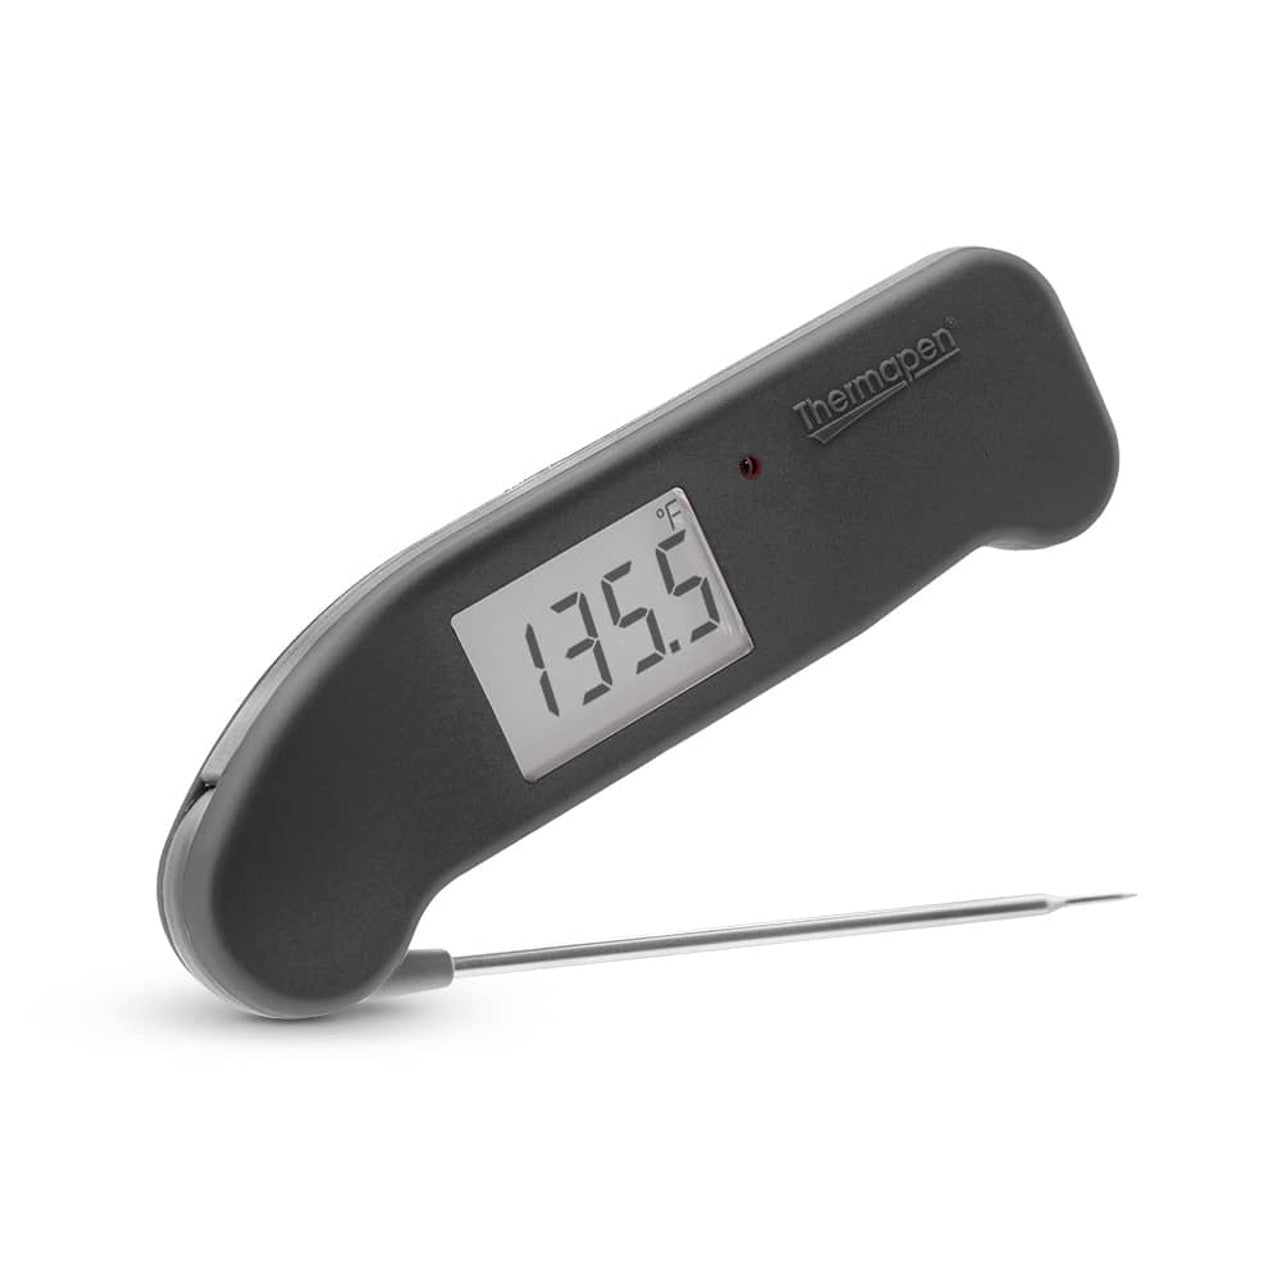 Thermapen One Thermometer ThermoWorks Indigo Pool Patio BBQ